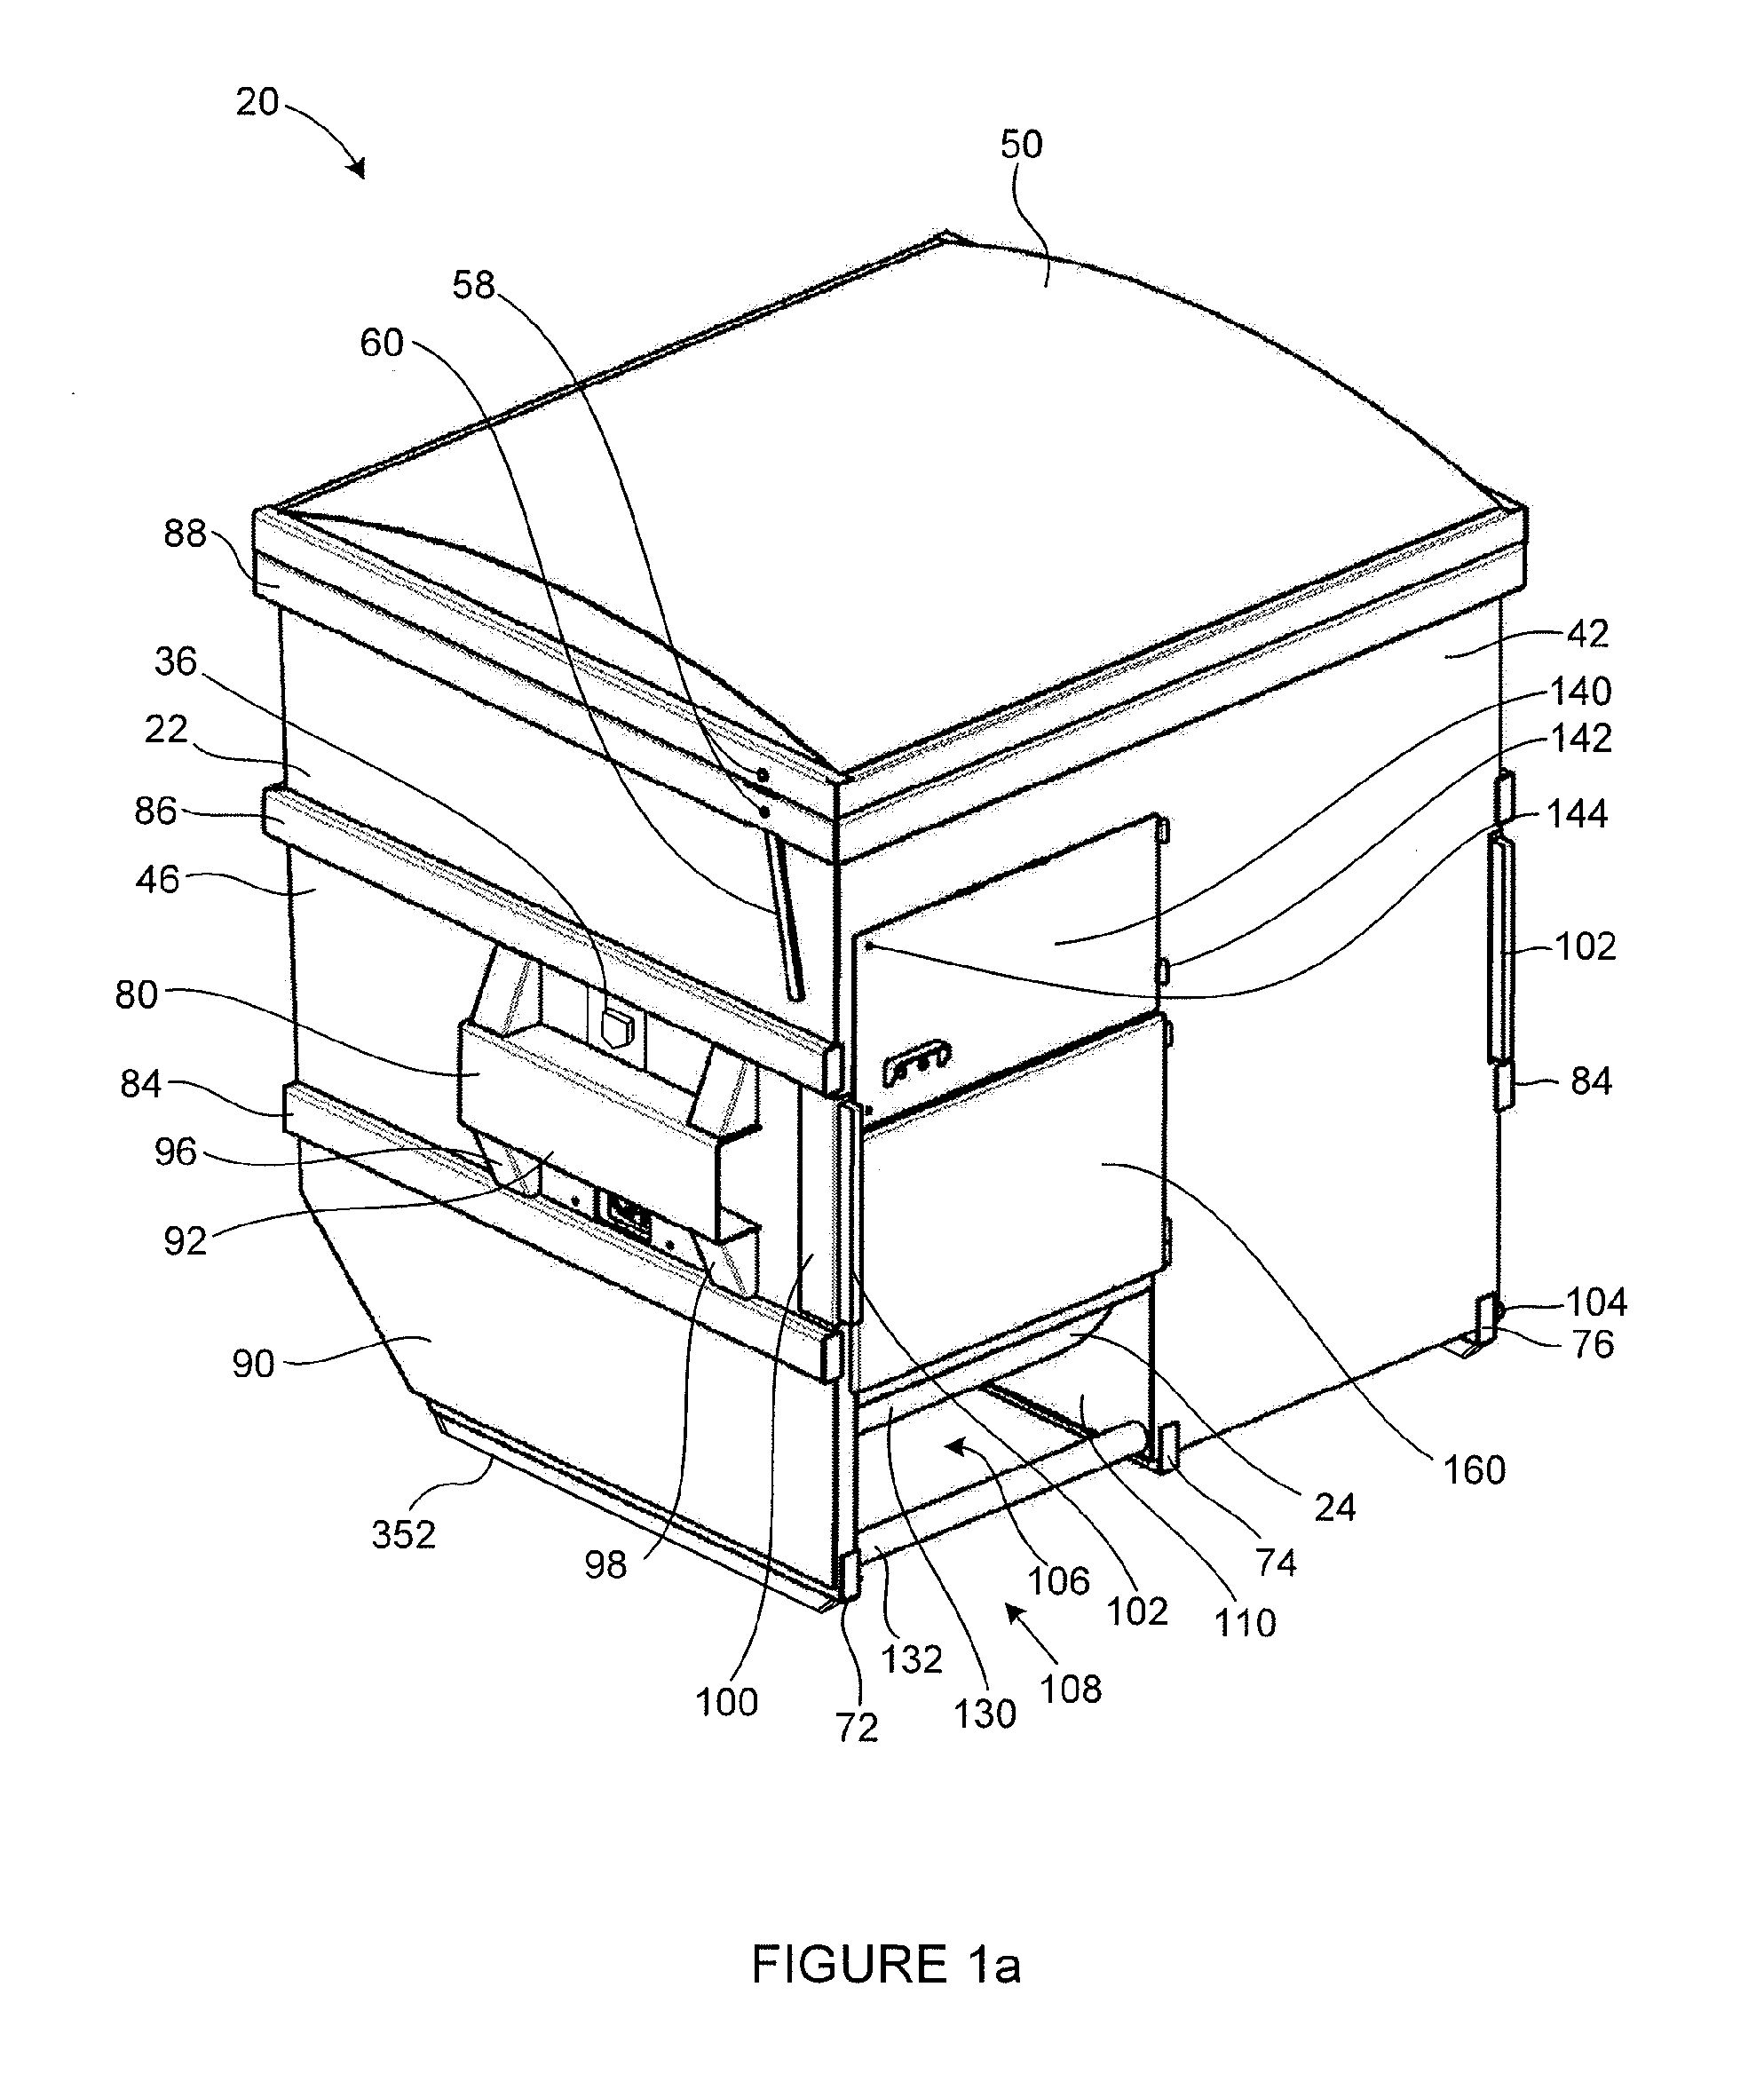 Waste containment apparatus